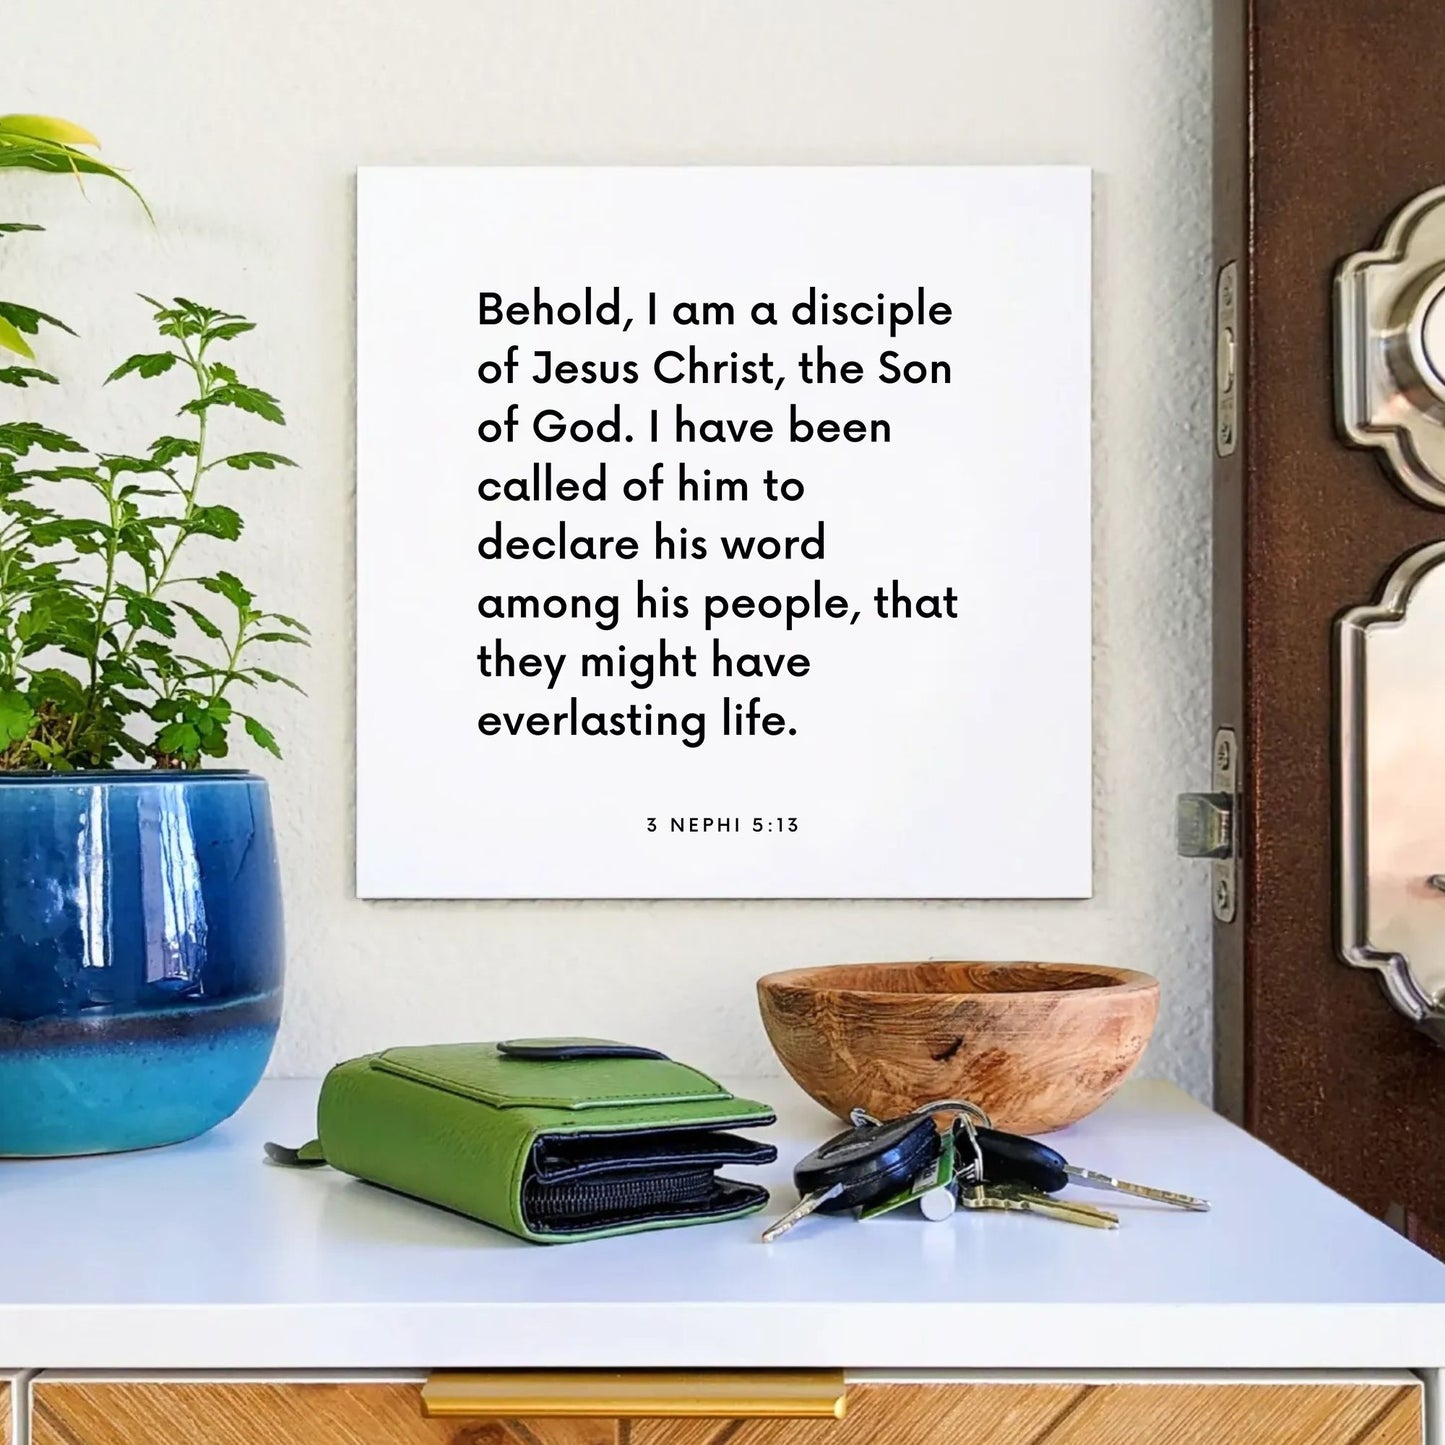 Entryway mouting of the scripture tile for 3 Nephi 5:13 - "Behold, I am a disciple of Jesus Christ, the Son of God"